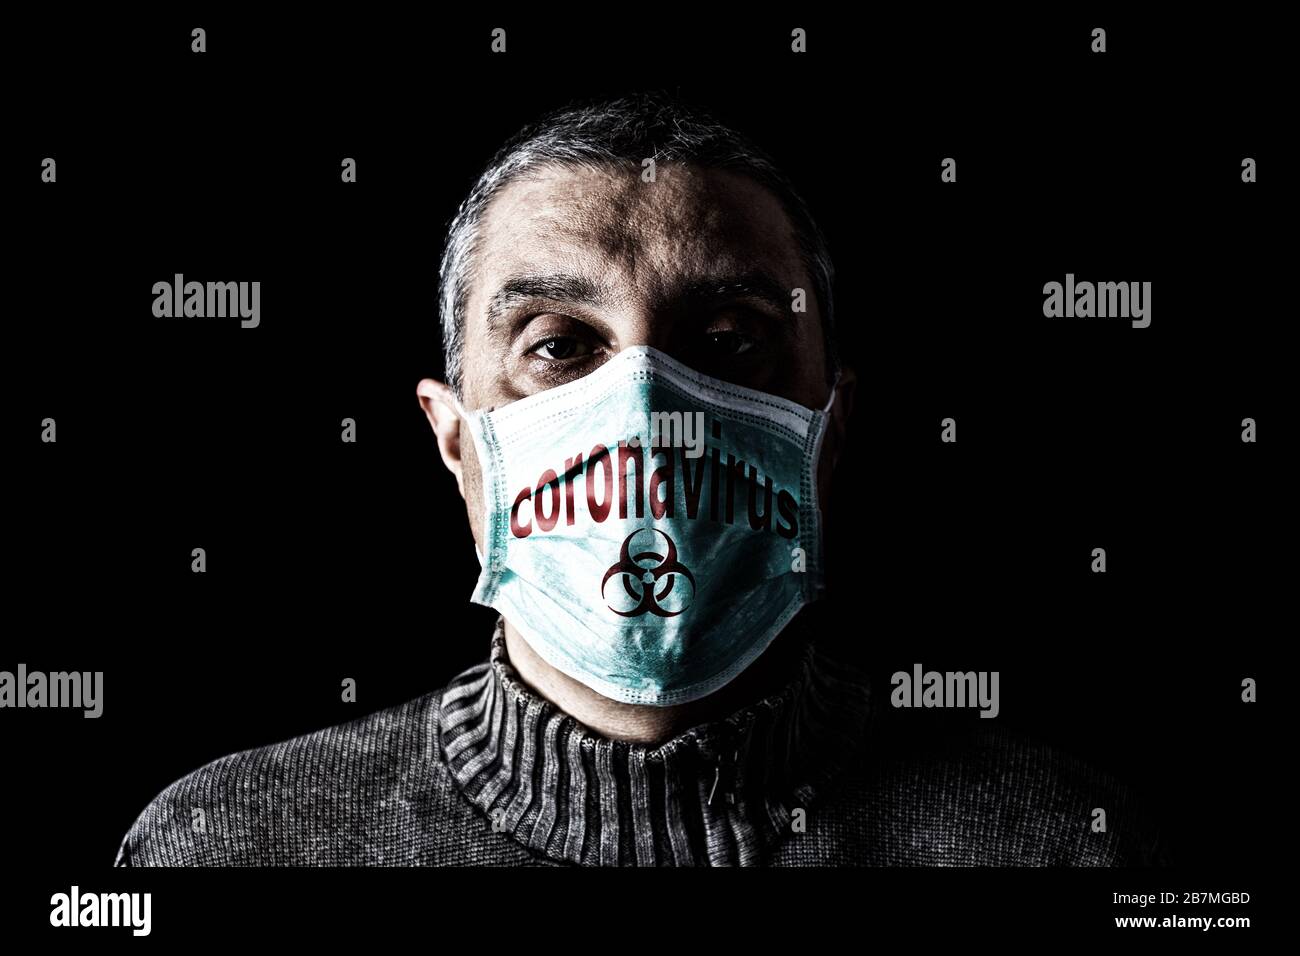 Man with surgical mask. Biohazard and Coronavirus, aka COVID-19 symbol. Pandemic or epidemic and scary, fear or danger concept. Black Background Stock Photo